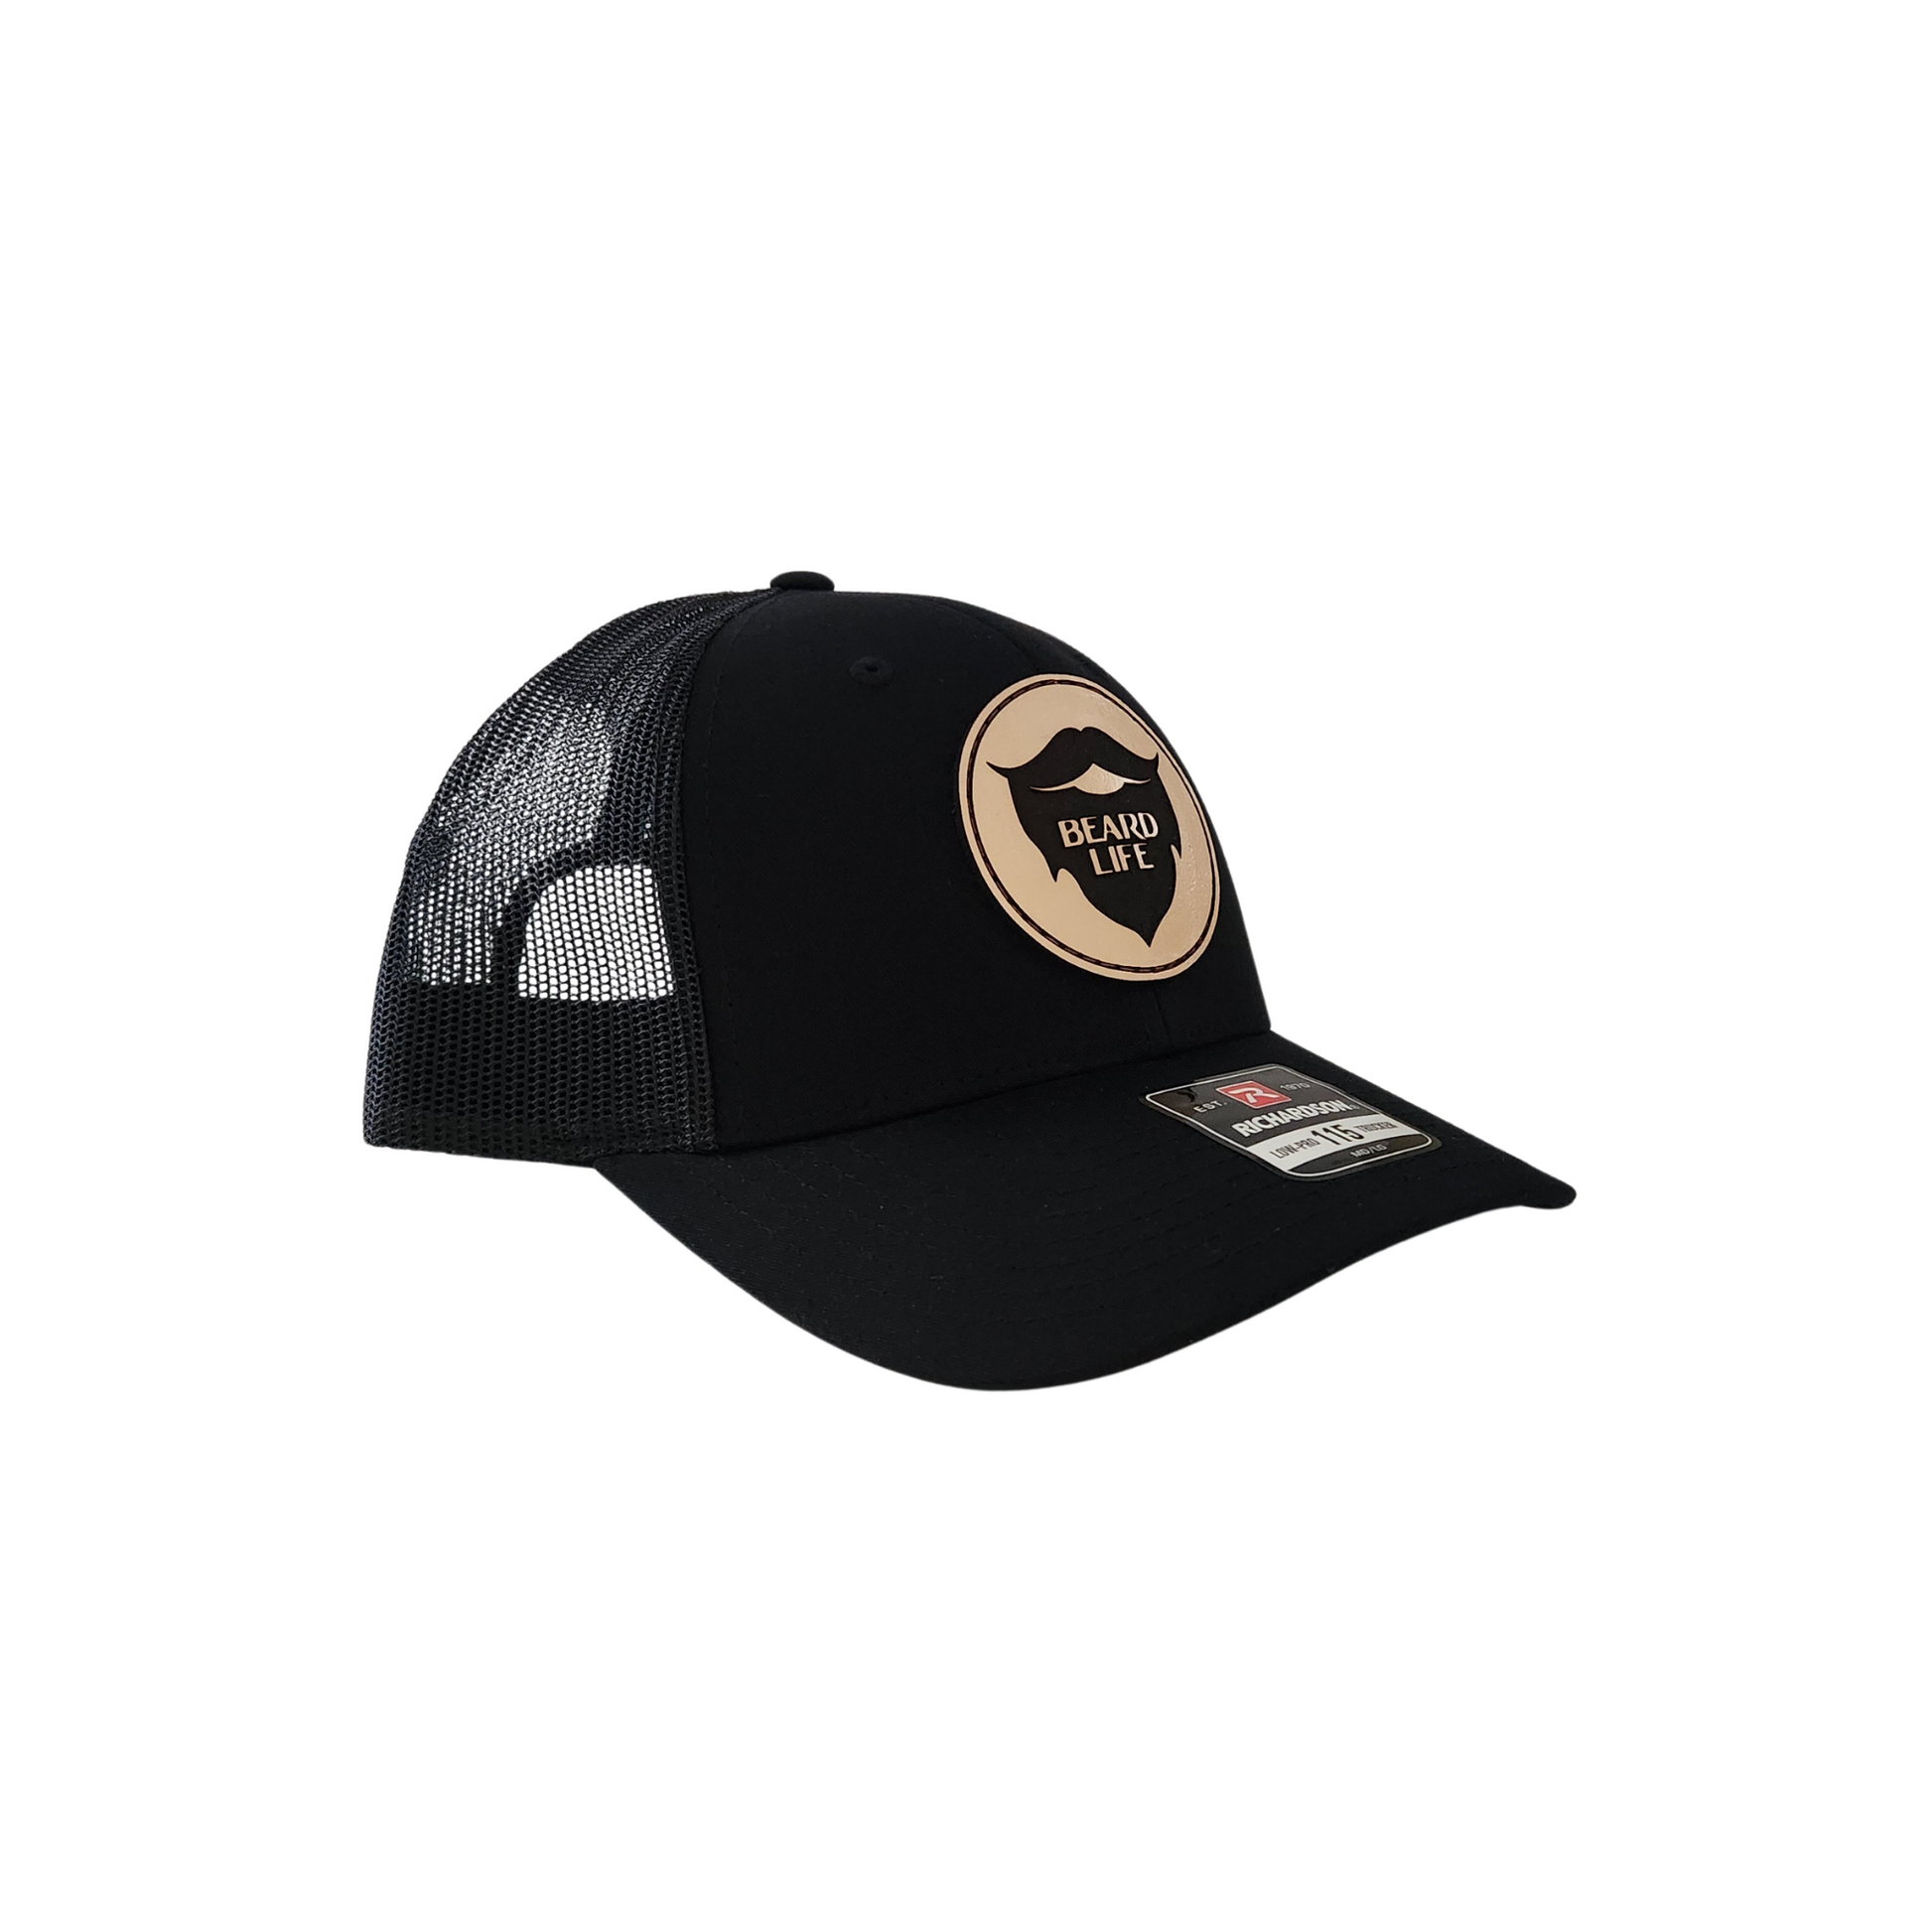 Black mesh trucker hat with beard life leather patch and snap back closure